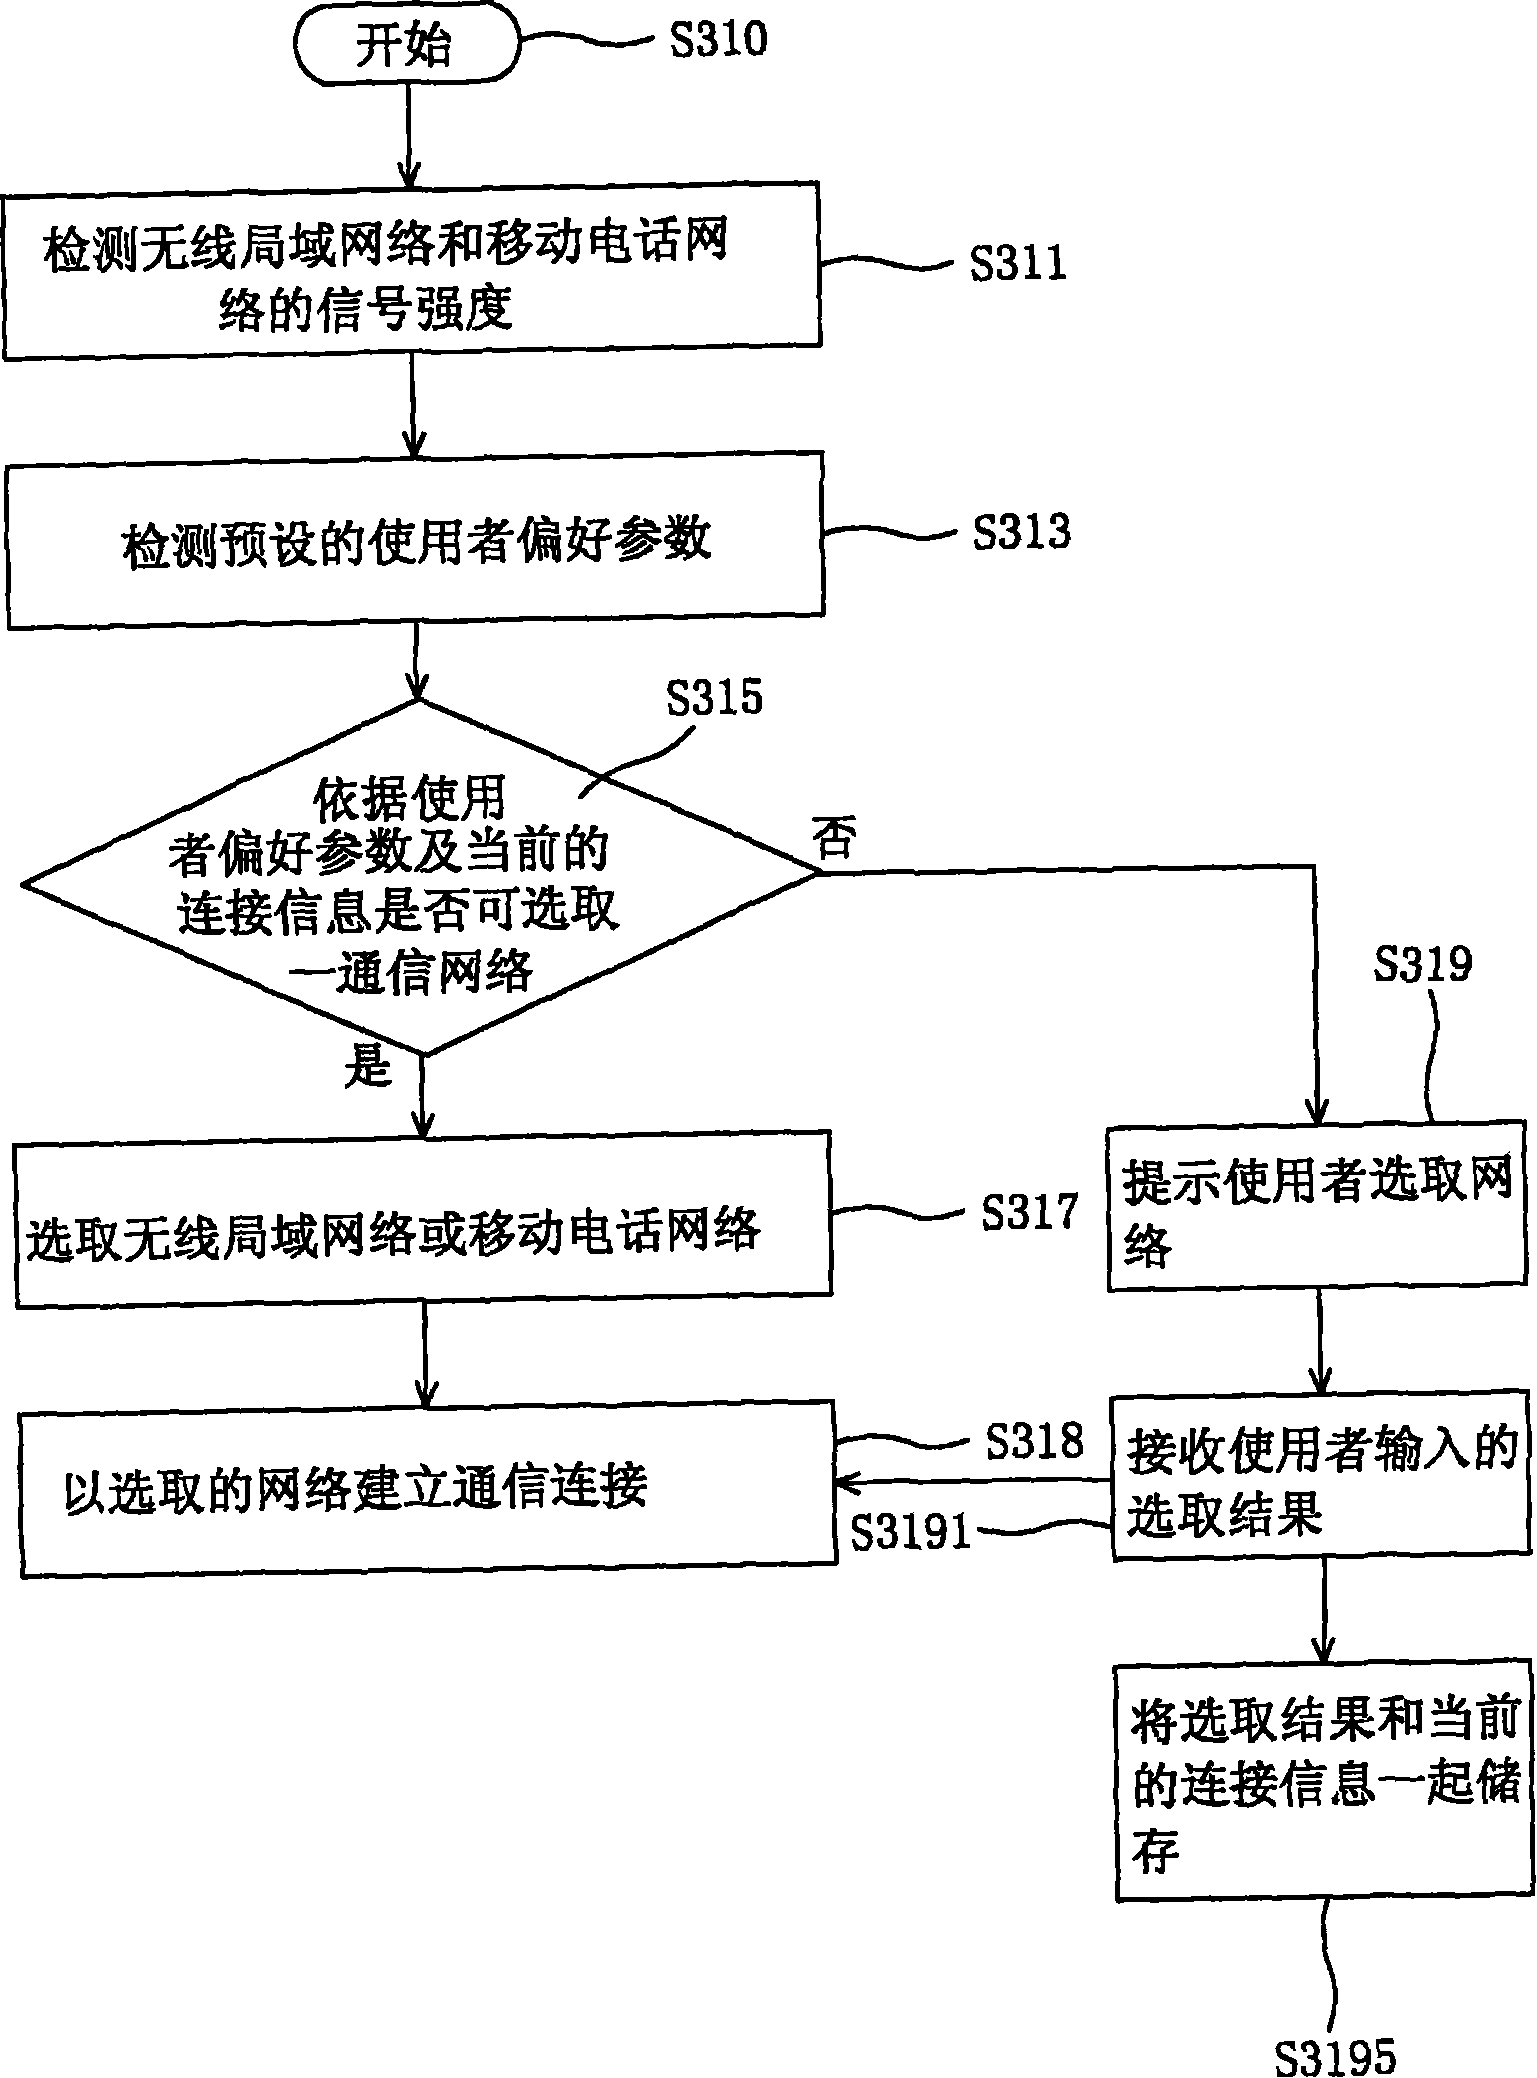 Wireless communication device and its method of establishing a communication connection and network switch method